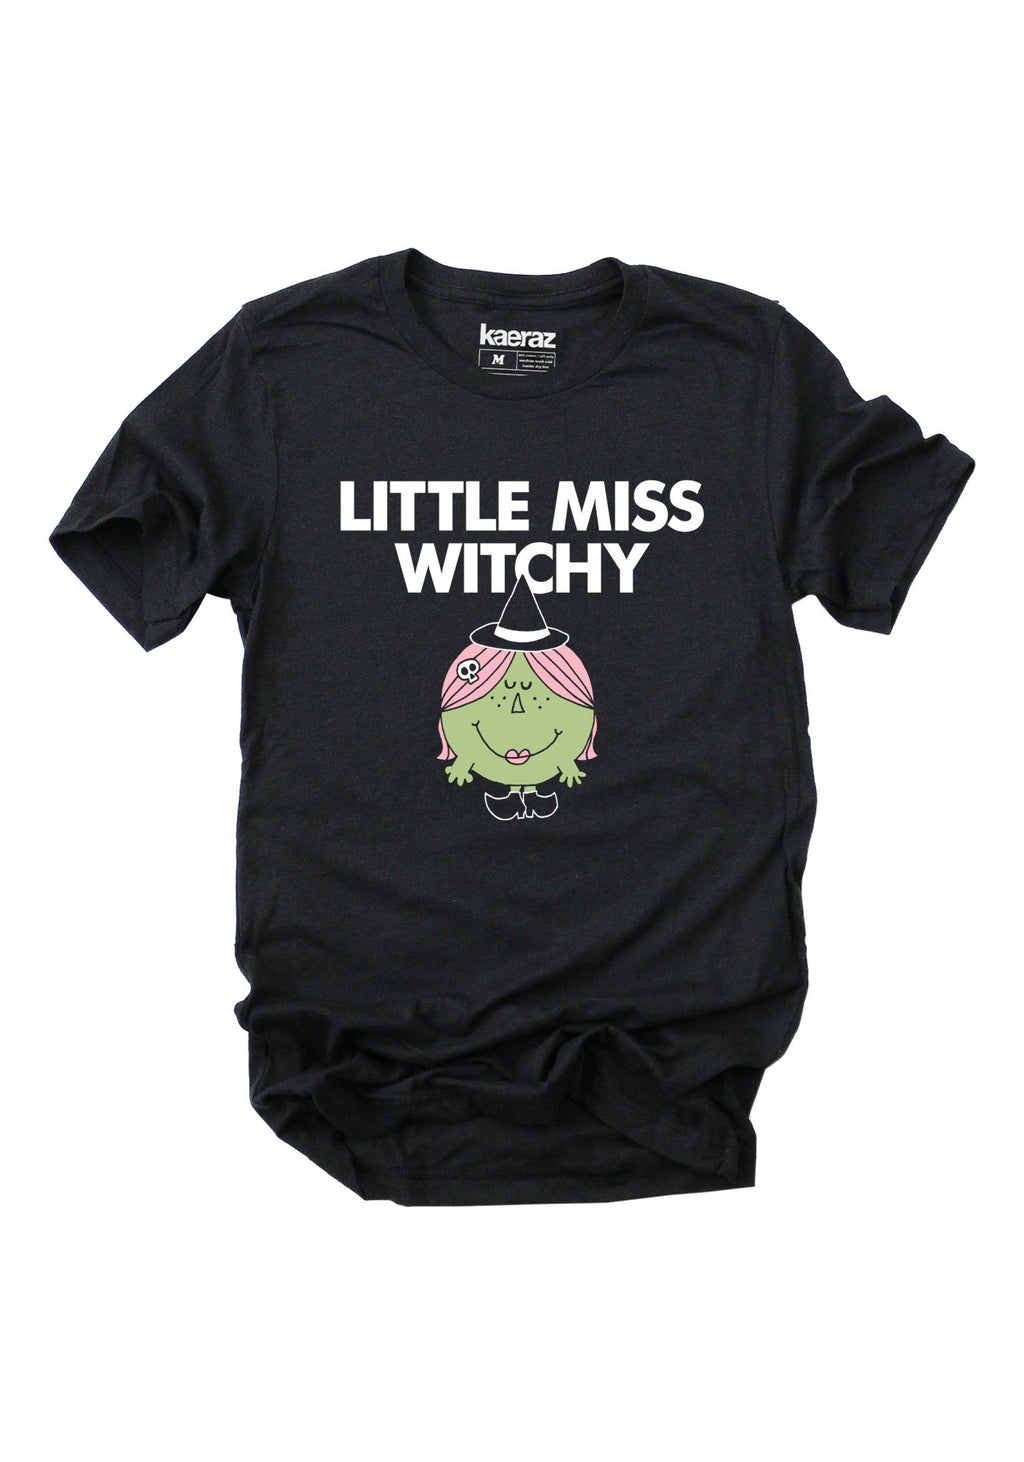 Skabelse Fristelse Narkoman Little Miss Witchy Tee by kaeraz | Womens Halloween Tees | Spooky Witchy  October Shirt